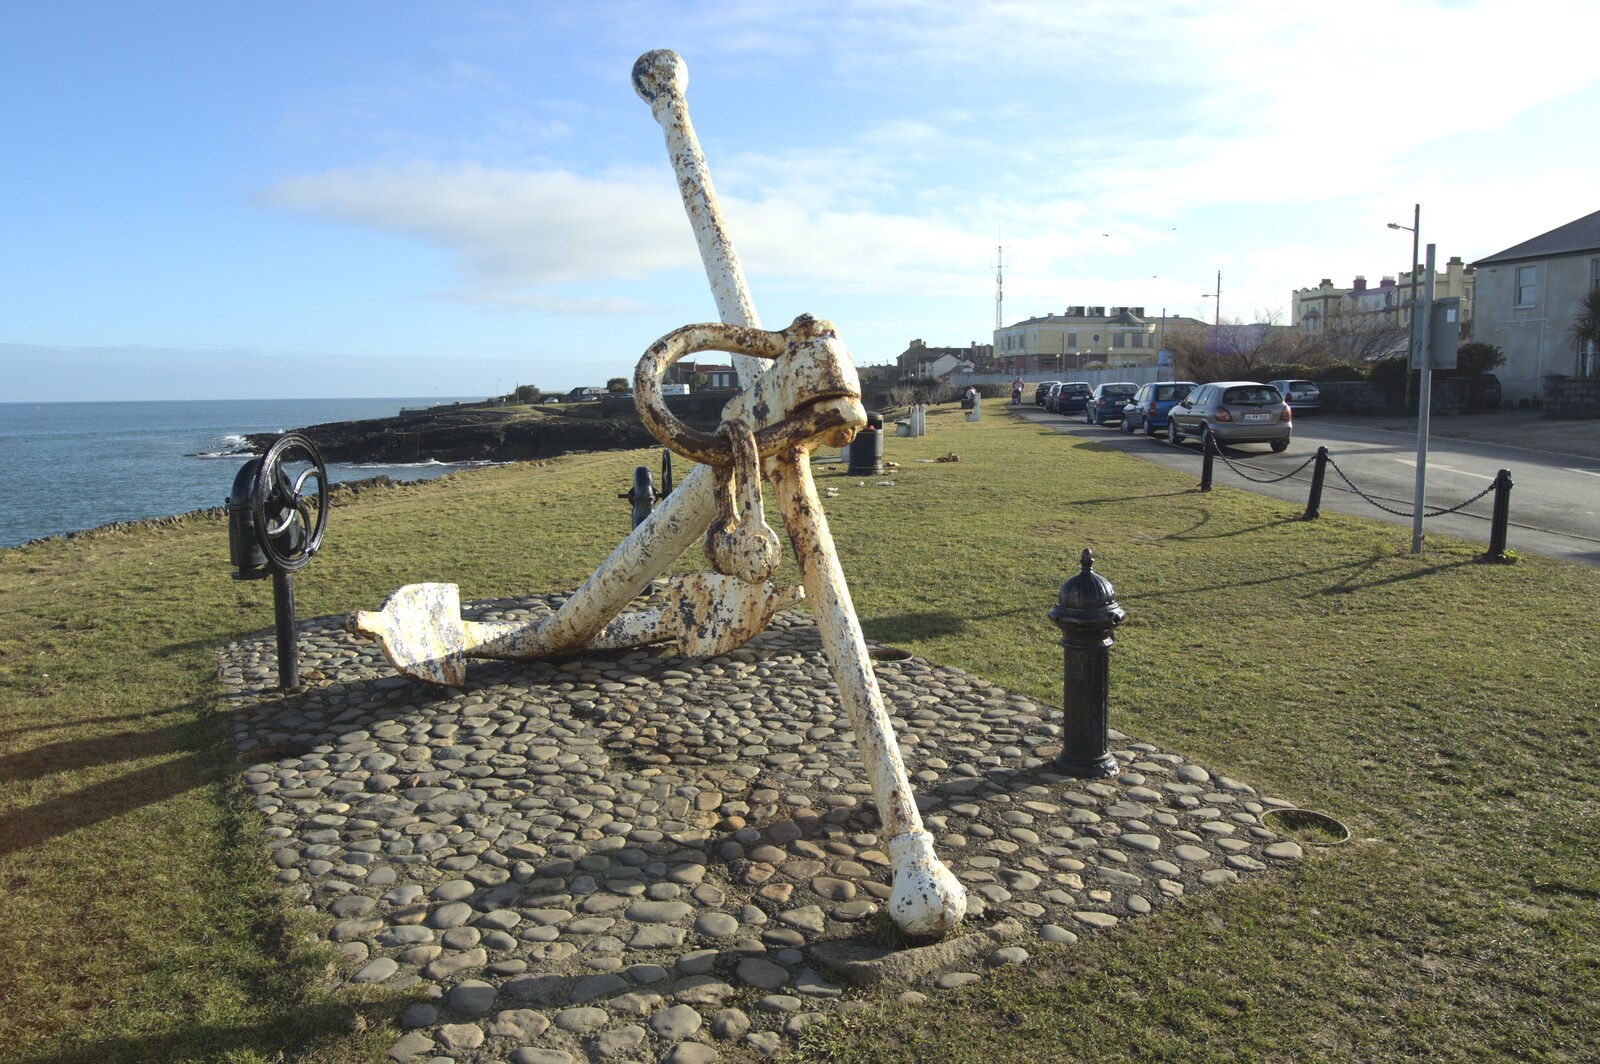 The anchor on Greystones clifftop from A Day in Greystones, County Dublin, Ireland - 28th February 2010